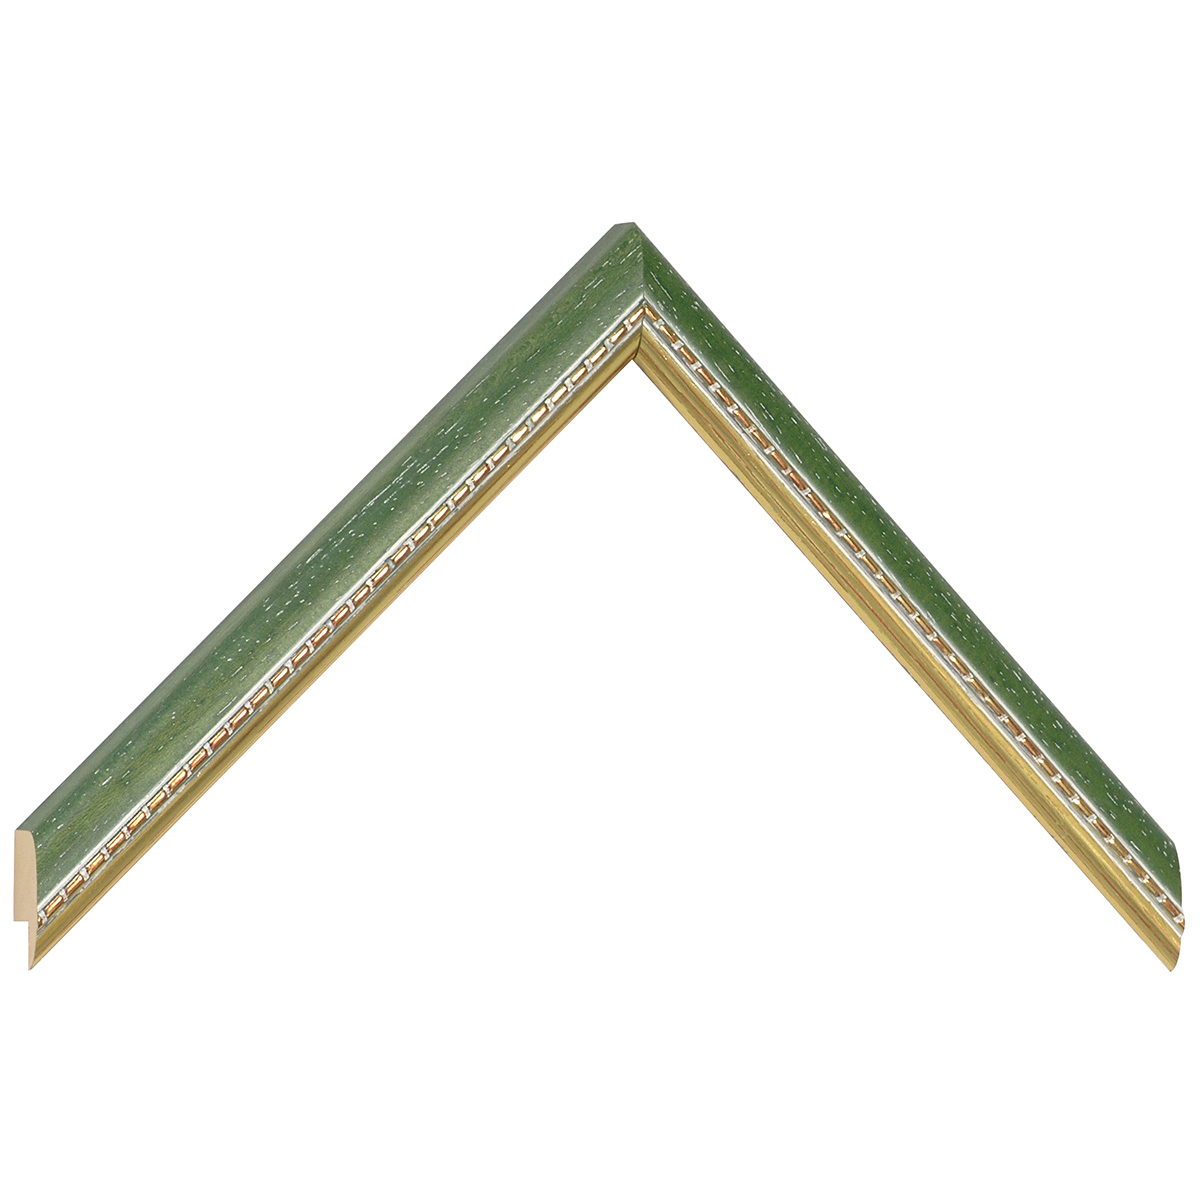 Moulding ayous 17mm - green, gold decorative relief - Sample